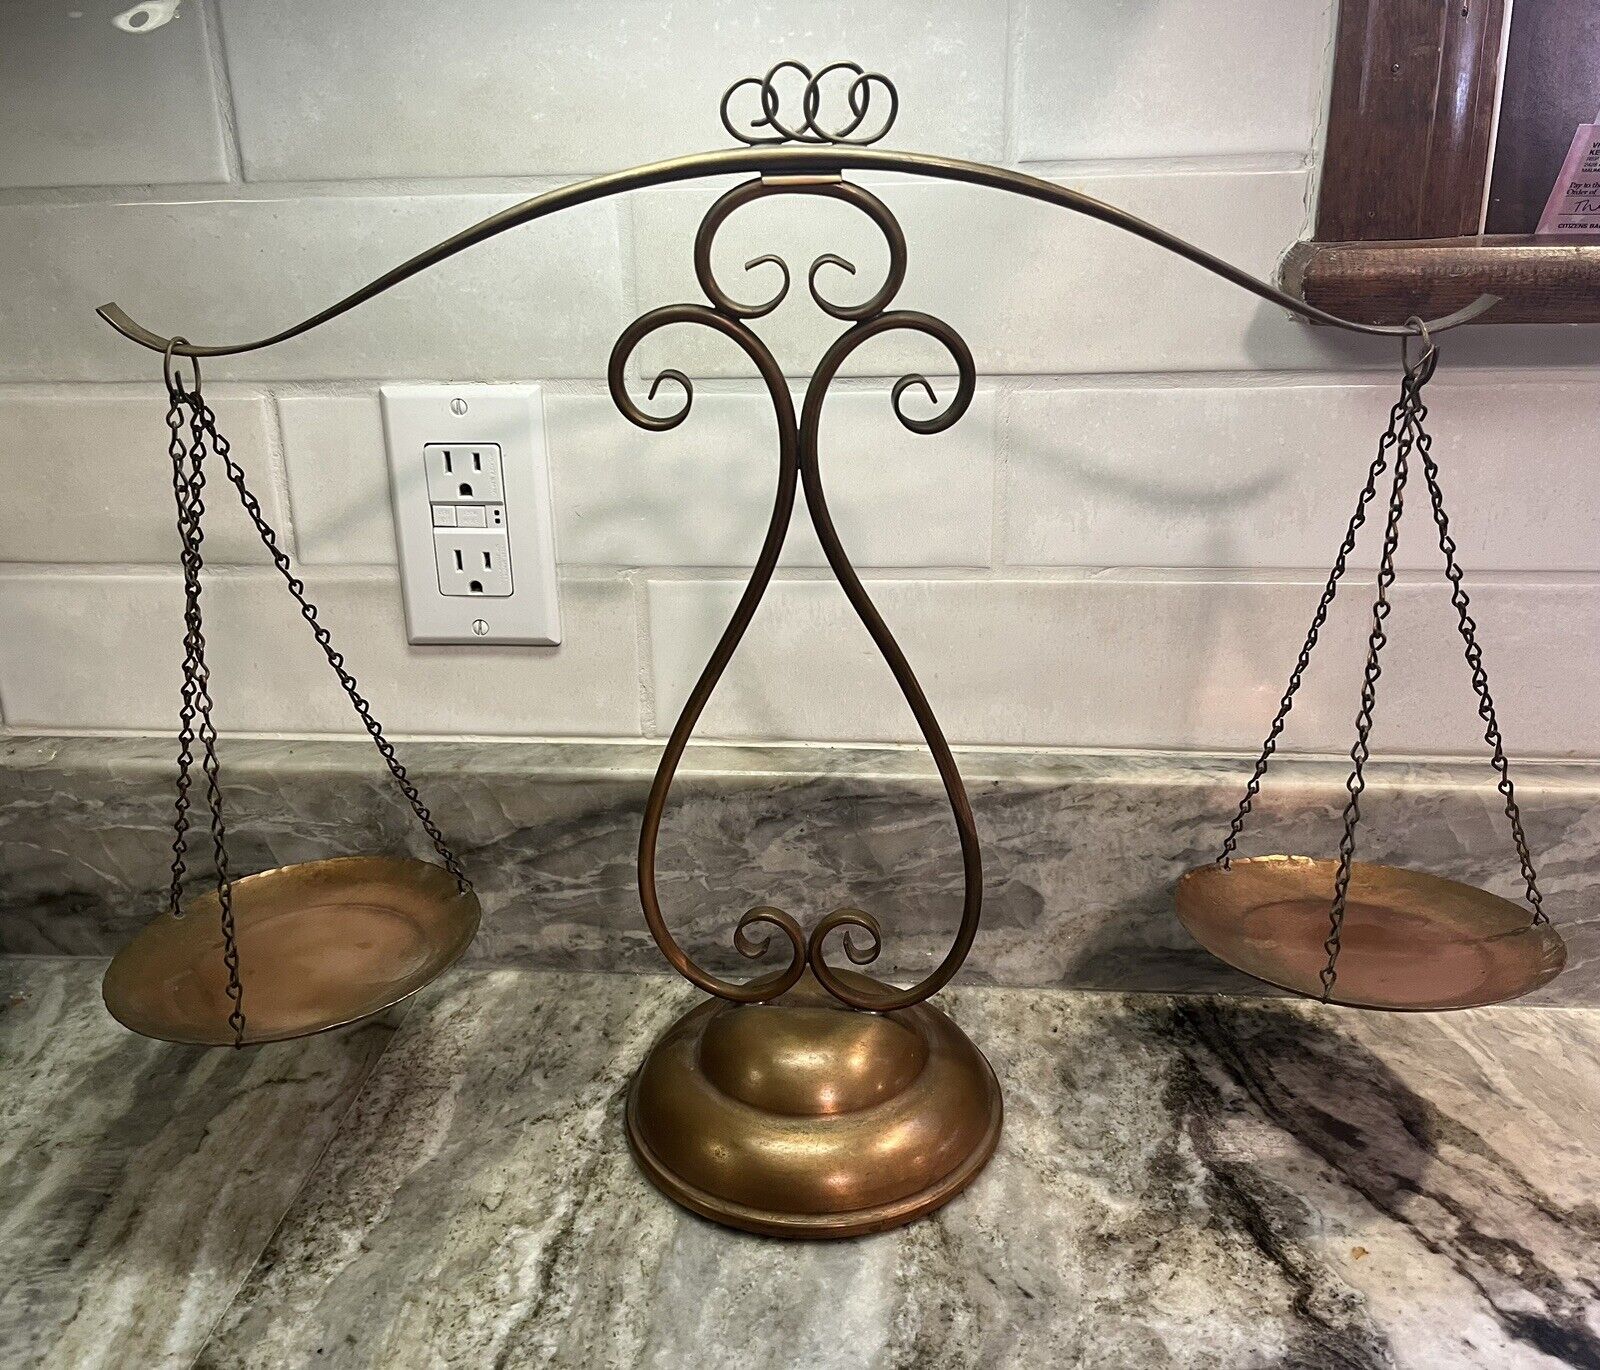 Vintage 1960s SOLID COPPER SCALE of JUSTICE Balance Made in the USA